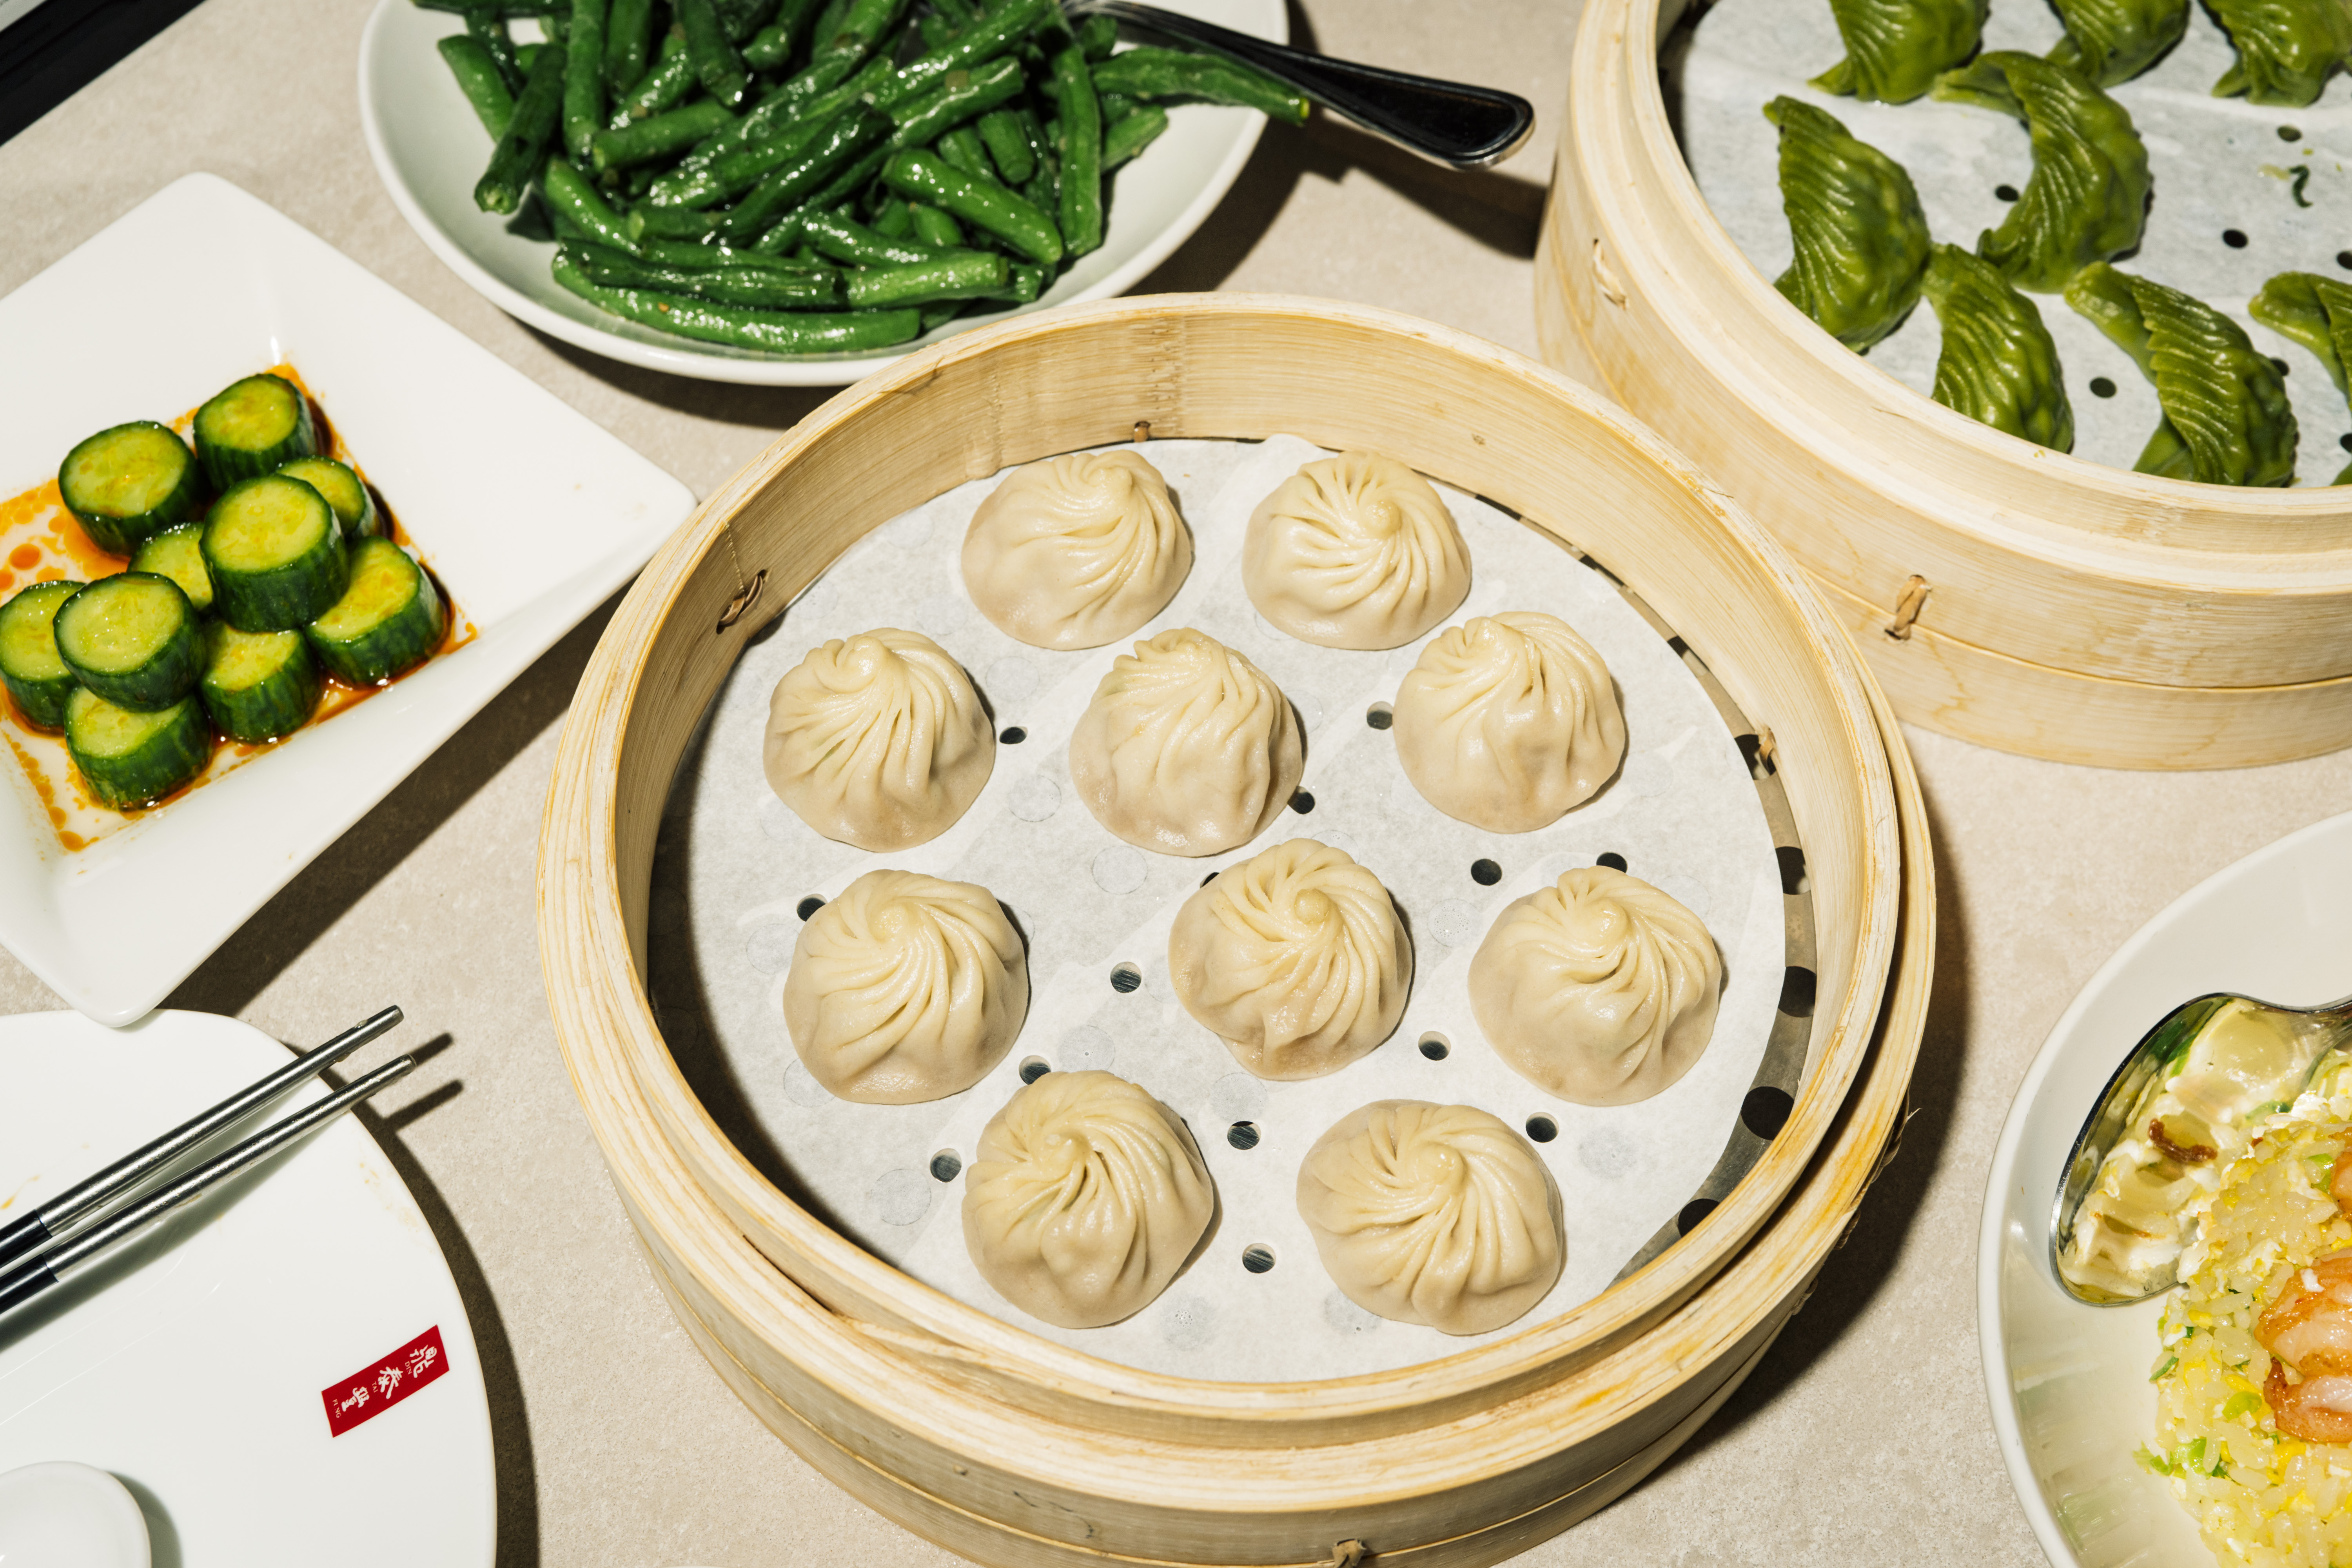 Pork xiaolongbao from Din Tai Fung in New York City.